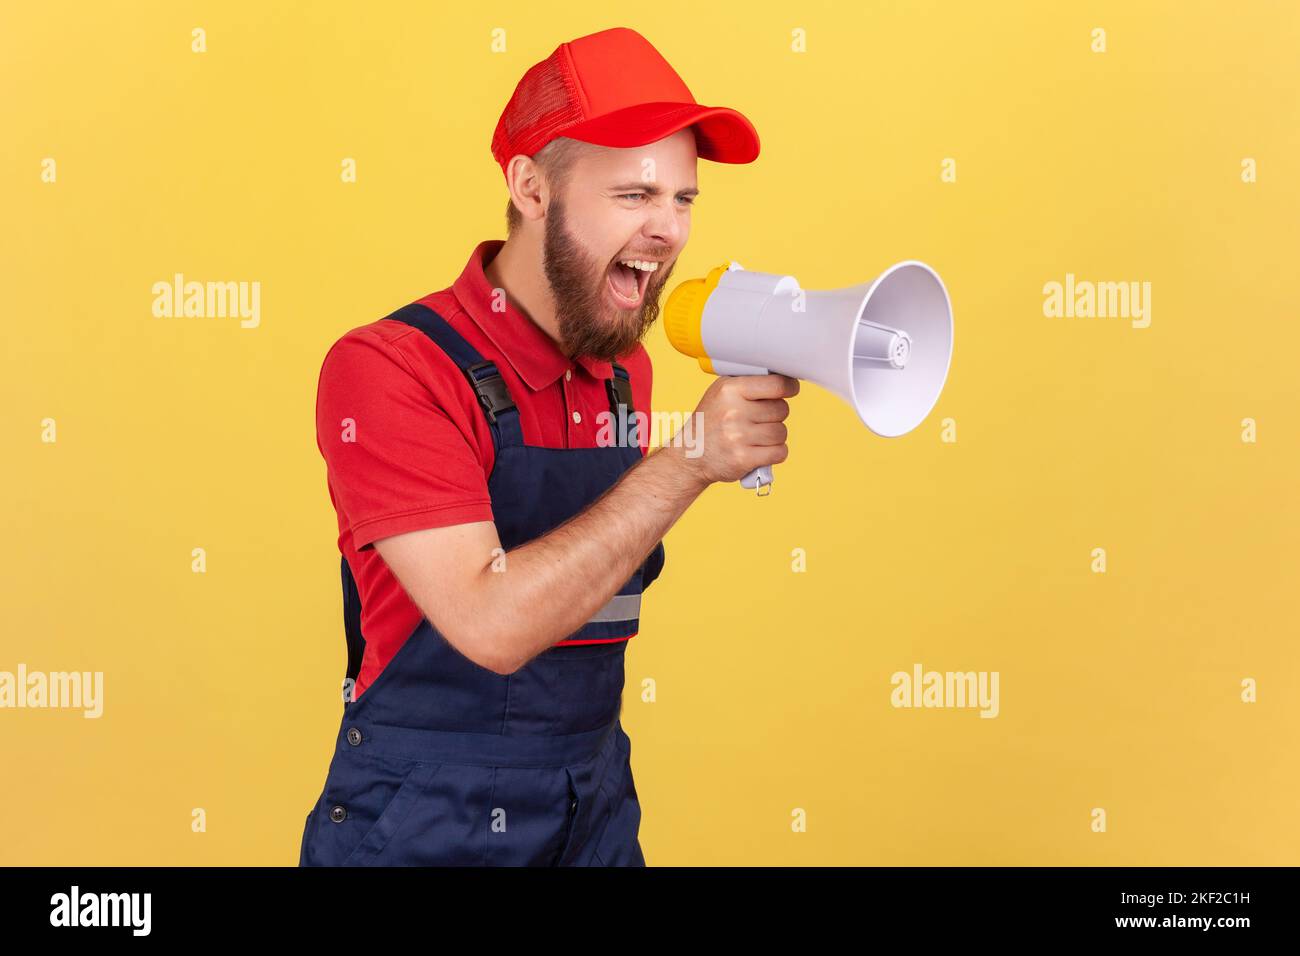 Side view of angry worker man holding megaphone near mouth loudly speaking, screaming, protesting, wearing blue uniform and red cap. Indoor studio shot isolated on yellow background. Stock Photo